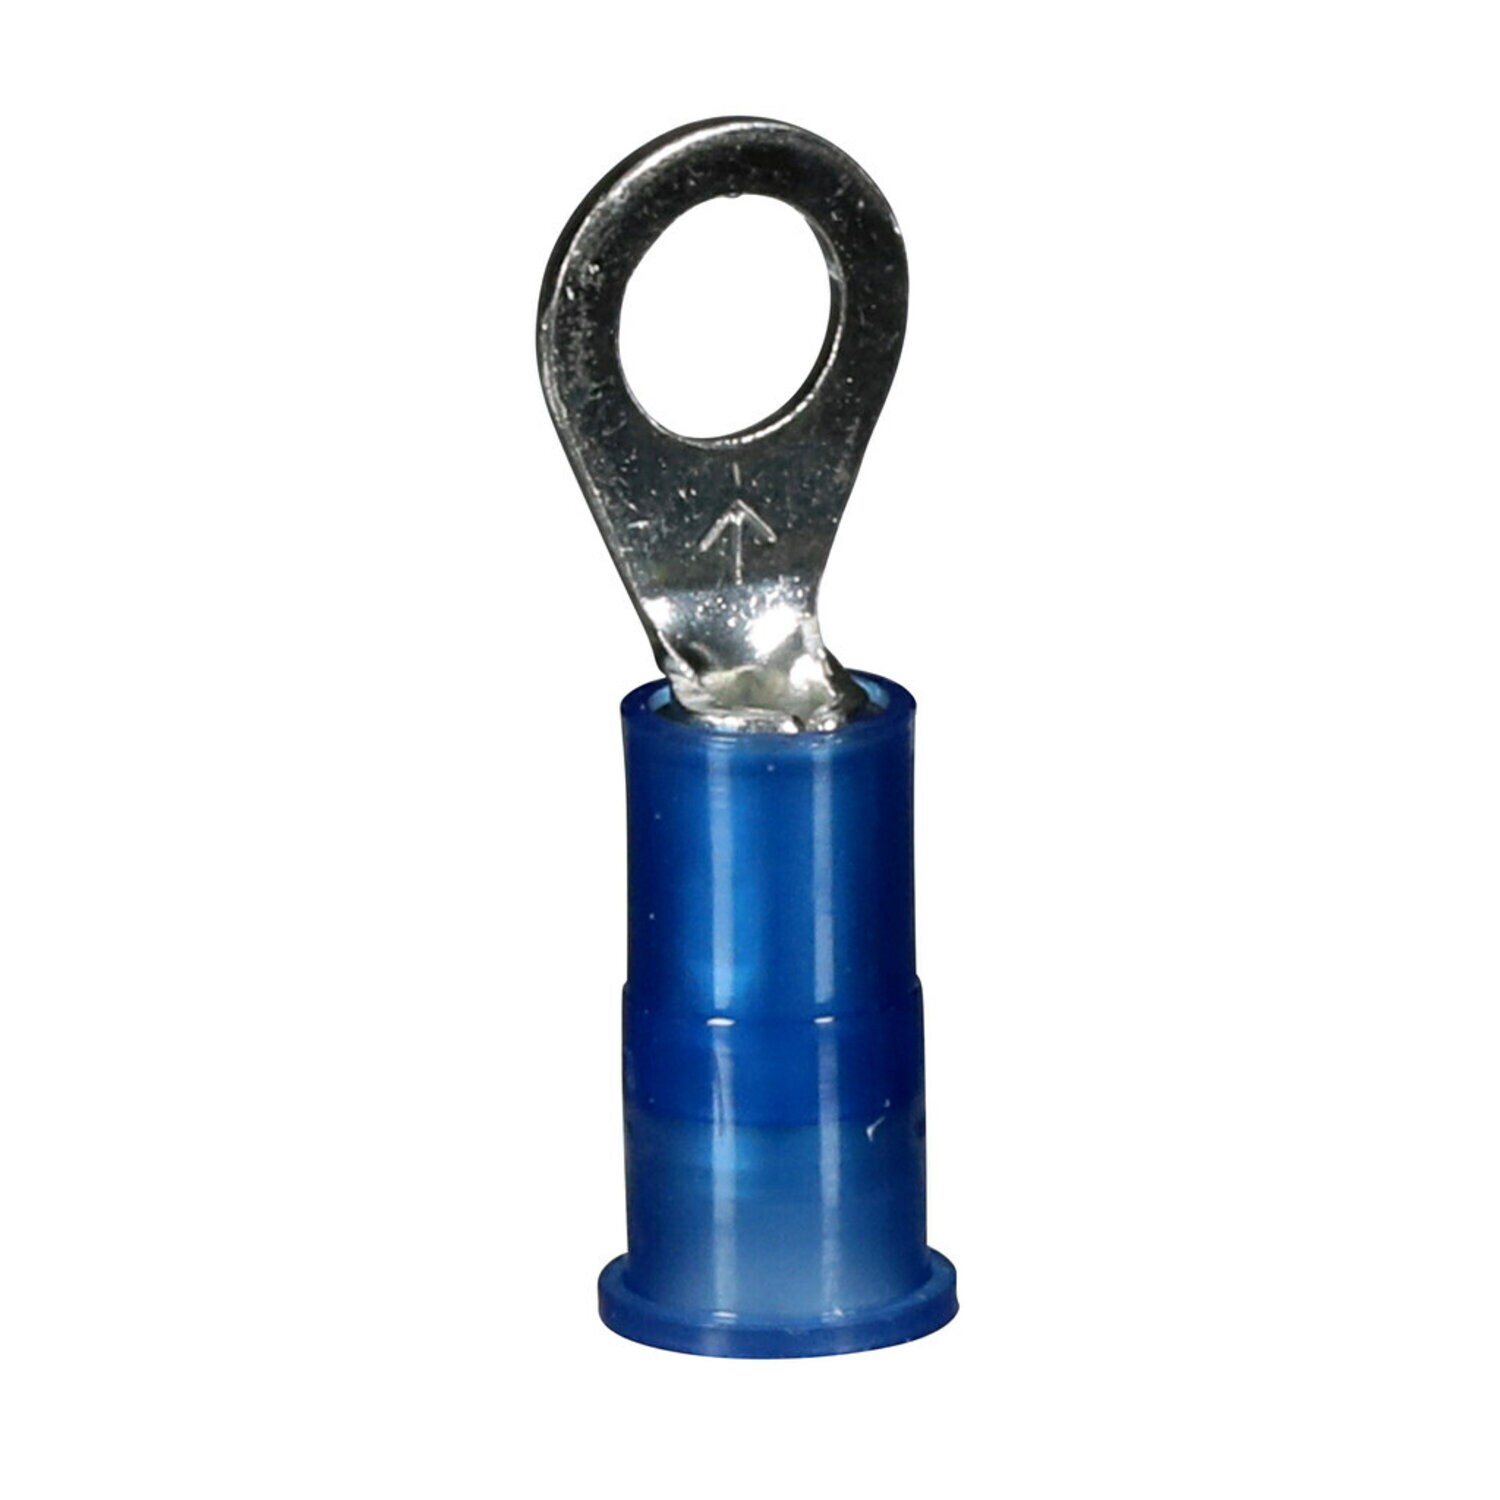 7000133416 - 3M Scotchlok Ring Nylon Insulated, 100/bottle, MNG14-10RX,
standard-style ring tongue fits around the stud, 500/Case